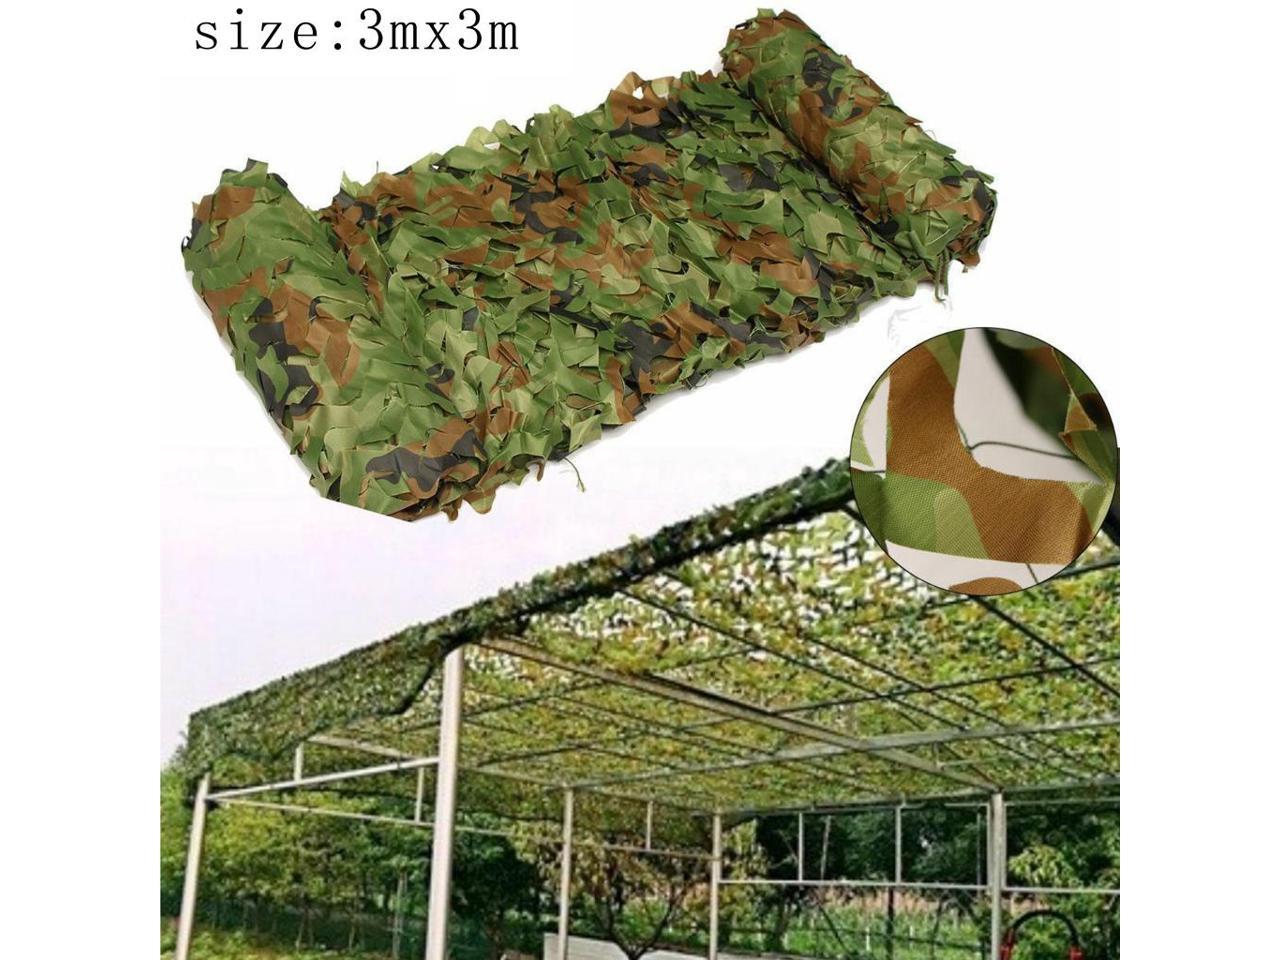 USA Camouflage Woodland Military Net Camo Netting Hunting Camping Tent Cover 